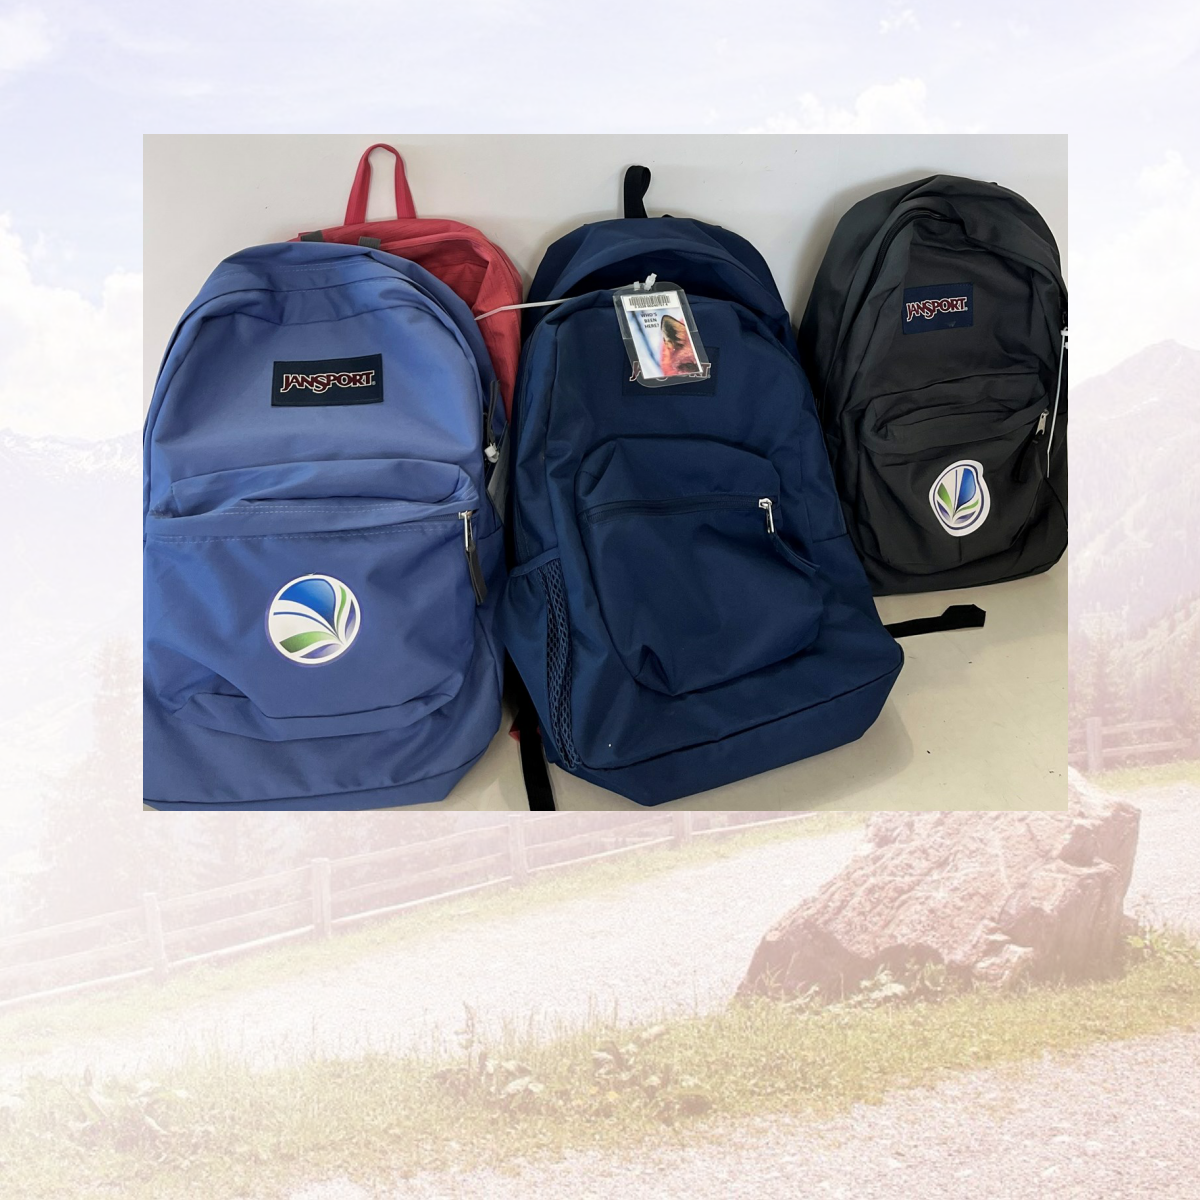 A fuzzy background photo of a rock in a field is overlaid with a clear photo of 4 backpacks featuring the BWG Library Logo